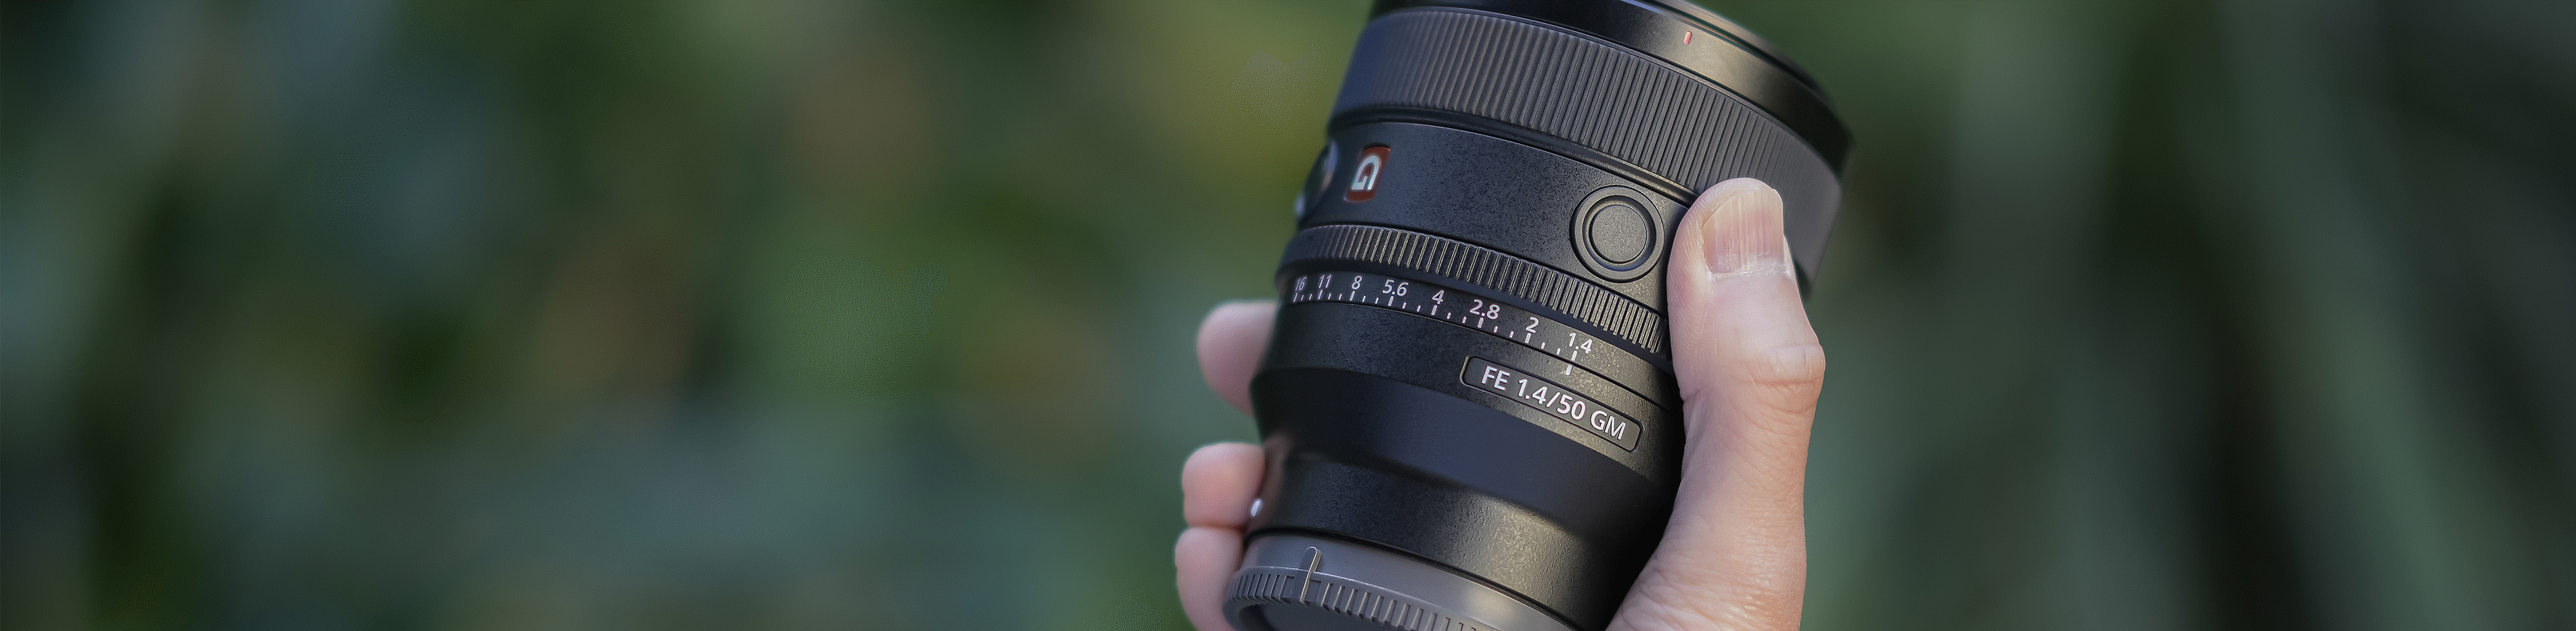 Lens being carried by hand